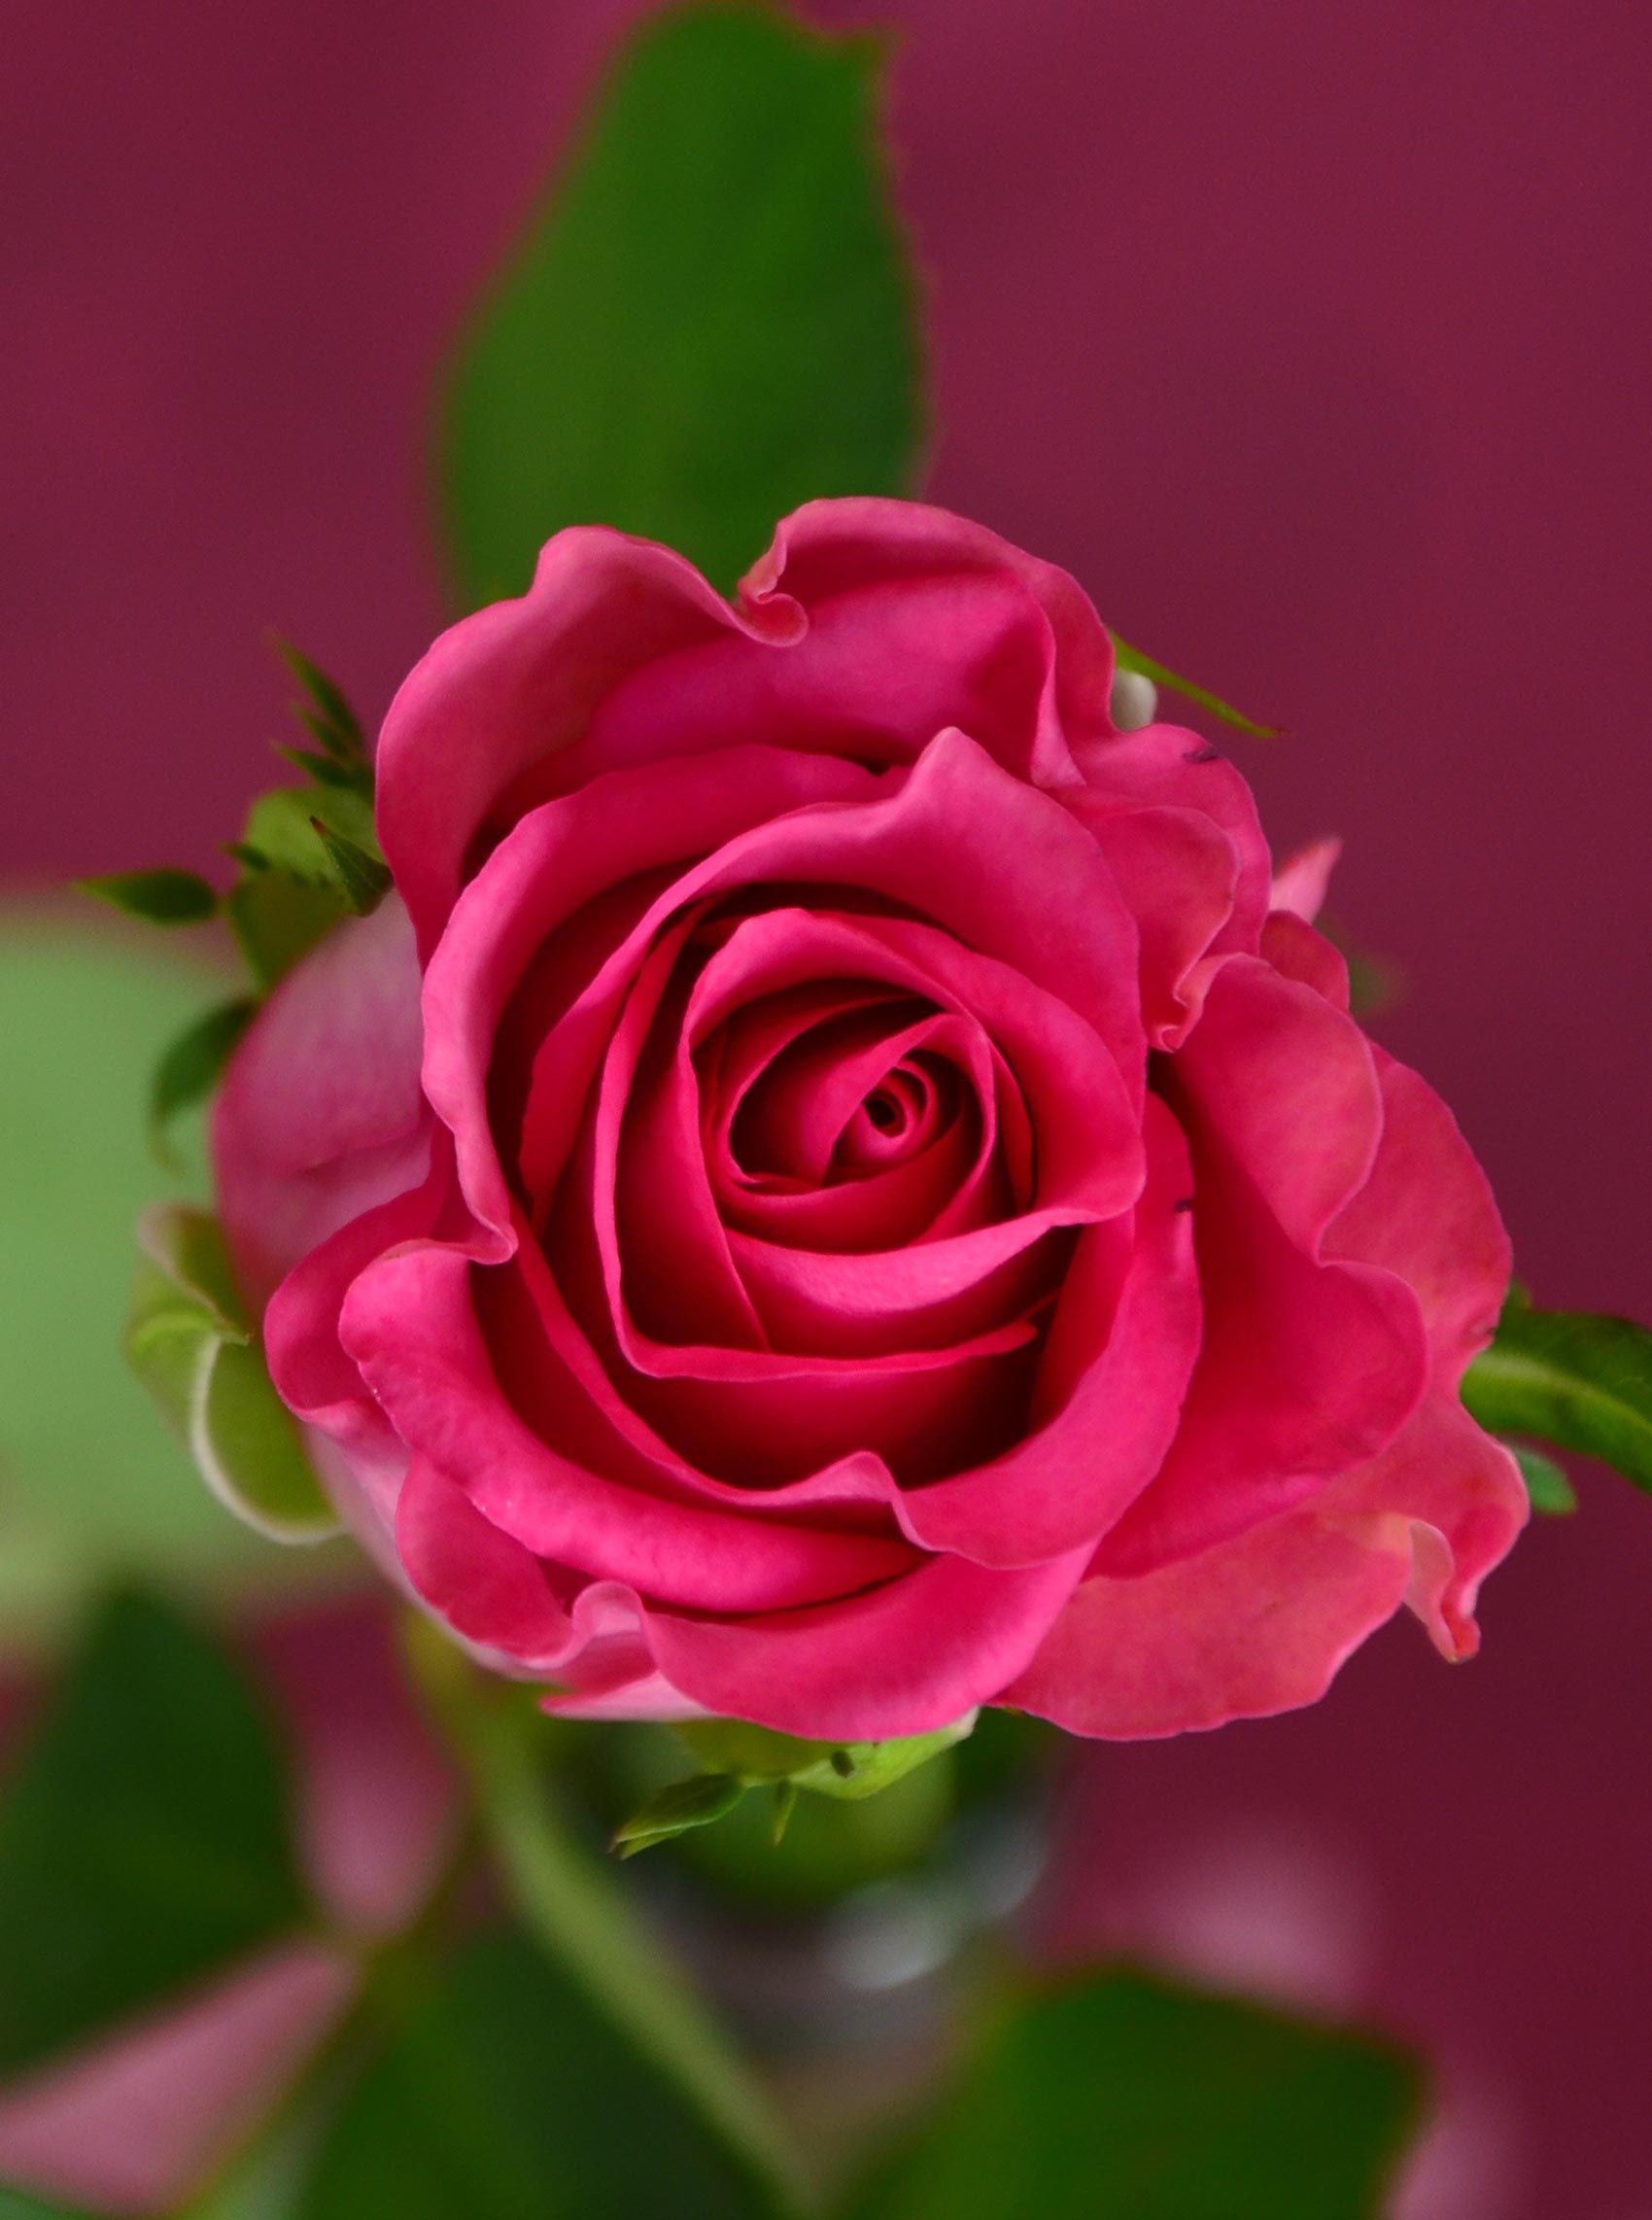 The 20 Best Flower Pictures That Will Inspire You | Rose flower ...